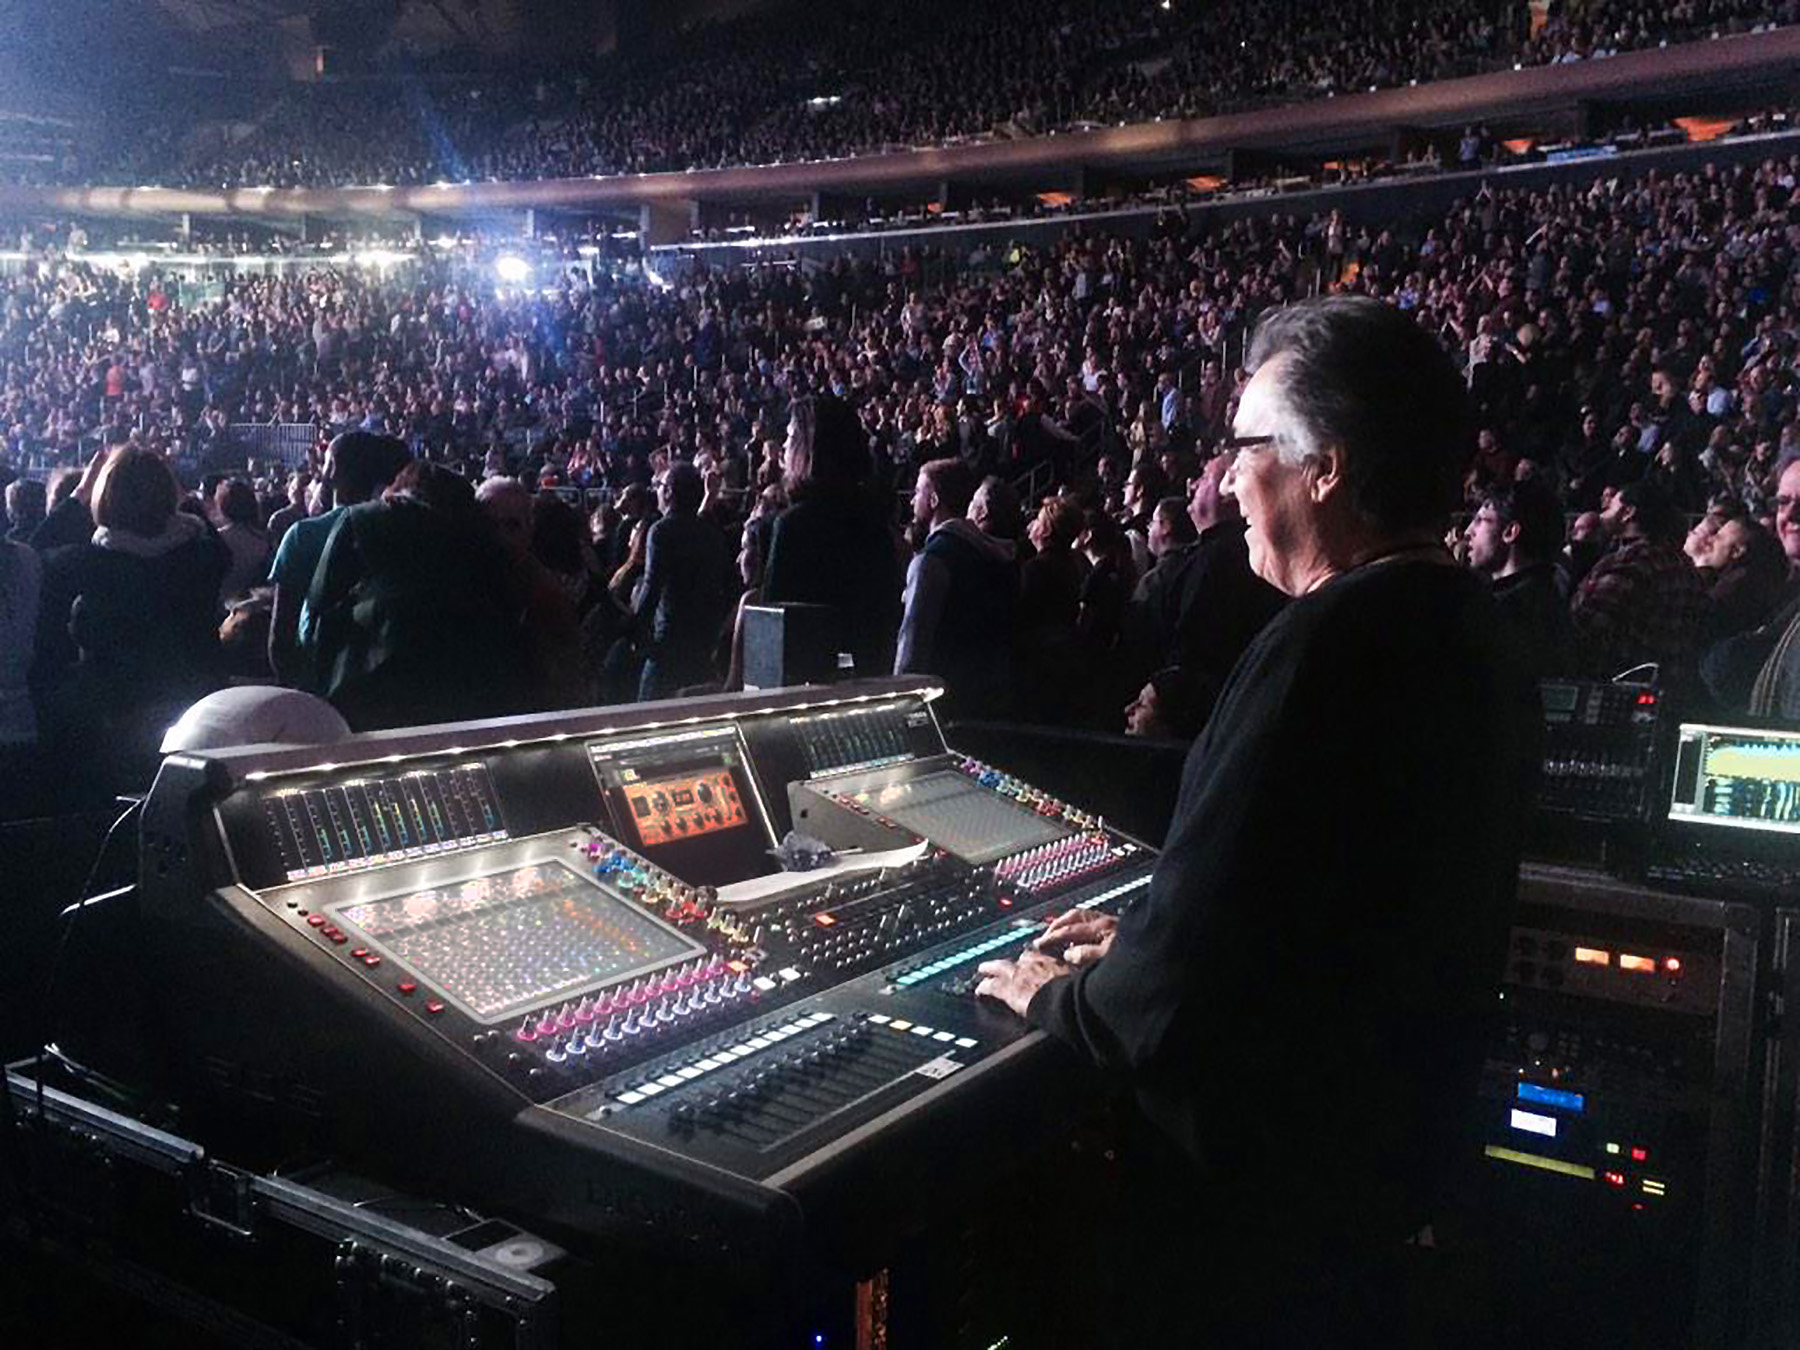 FOH Engineer Brian Ruggles at the DiGiCo SD5 console